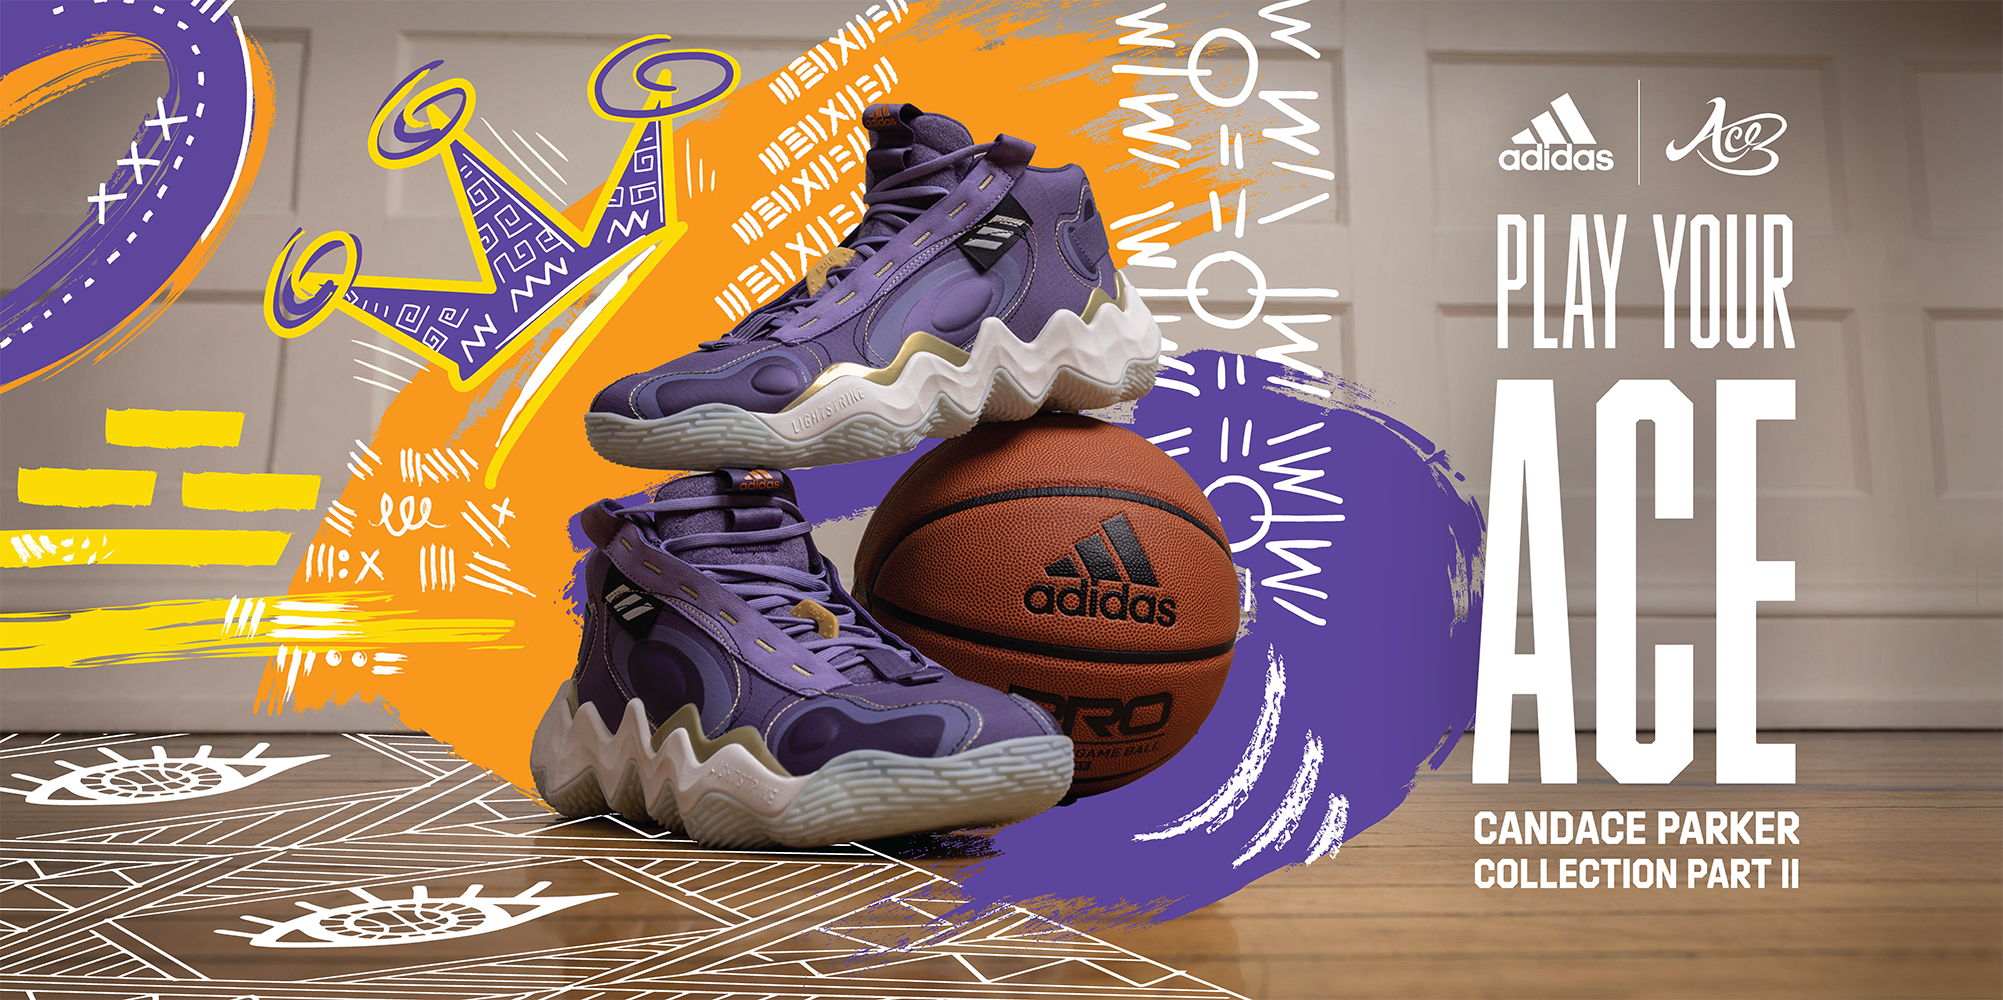 Adidas_CandaceParkerCollectionII_Royalty_Product_KVs-1